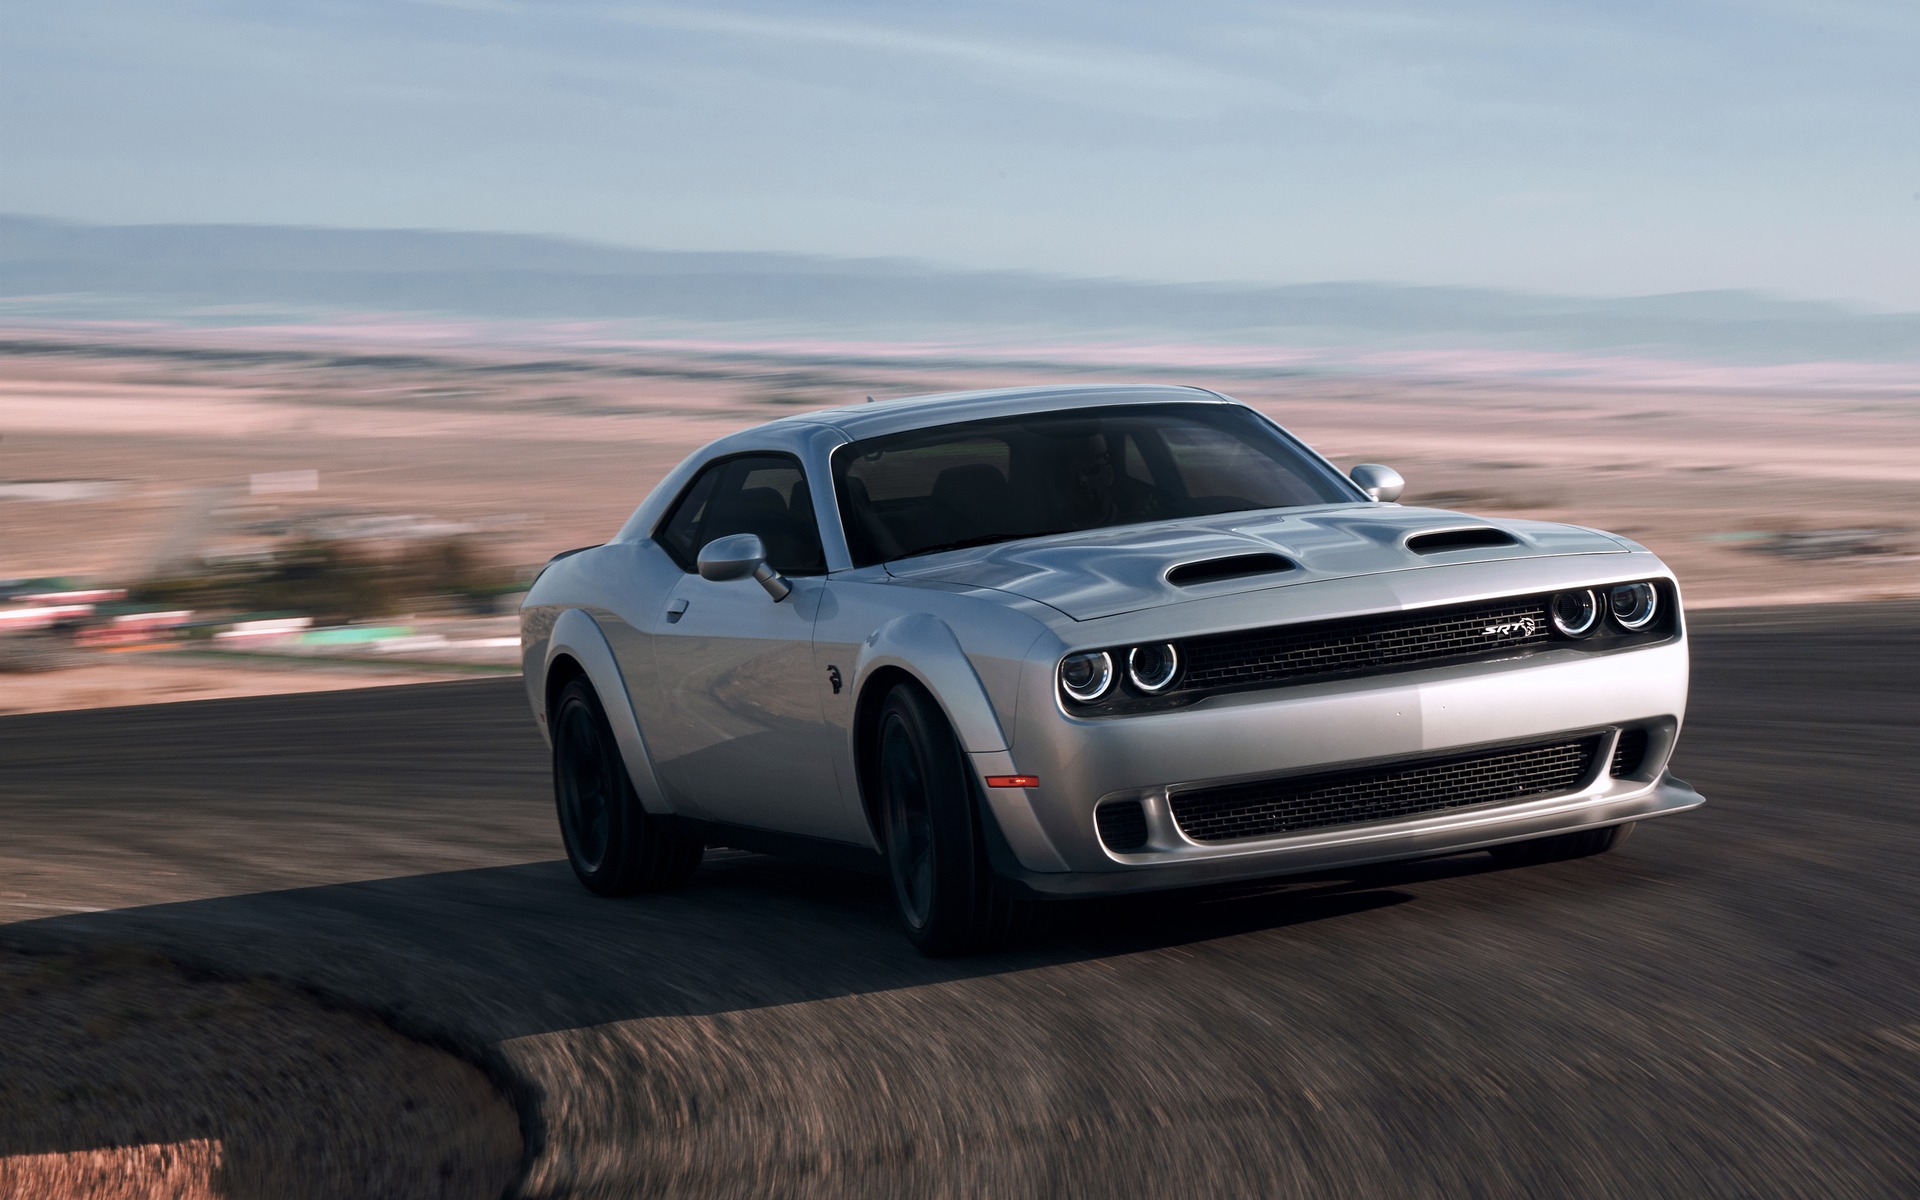 2019 Dodge Challenger Hellcat Redeye More Power The Car Guide